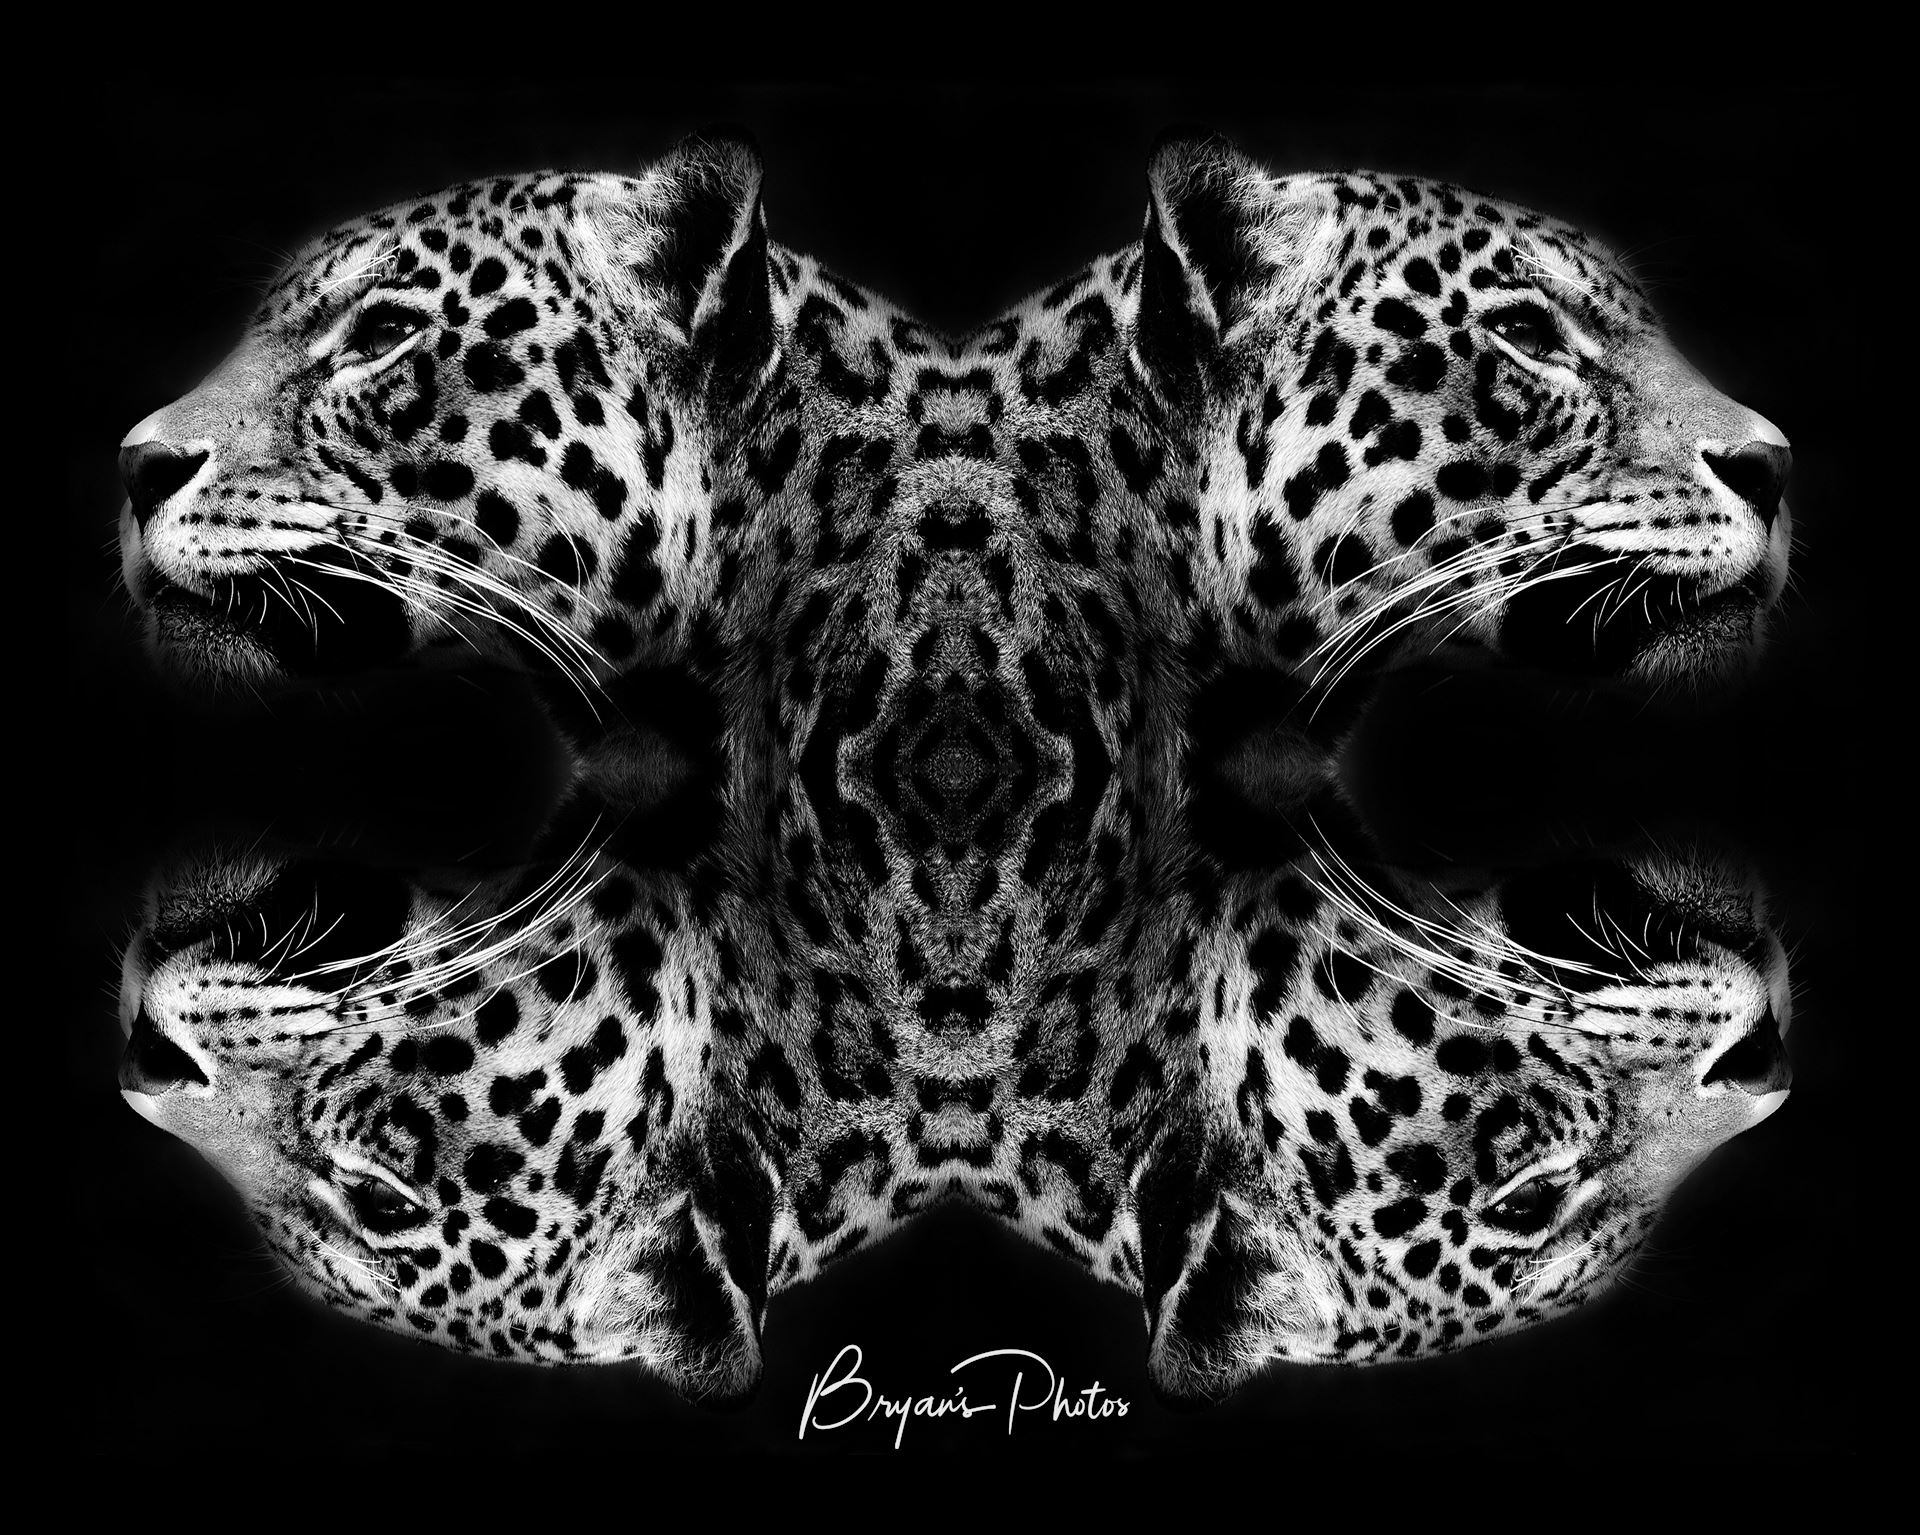 Jaguar Art Black & White An image of a jaguars head mirrored and merged into wall art by Bryans Photos